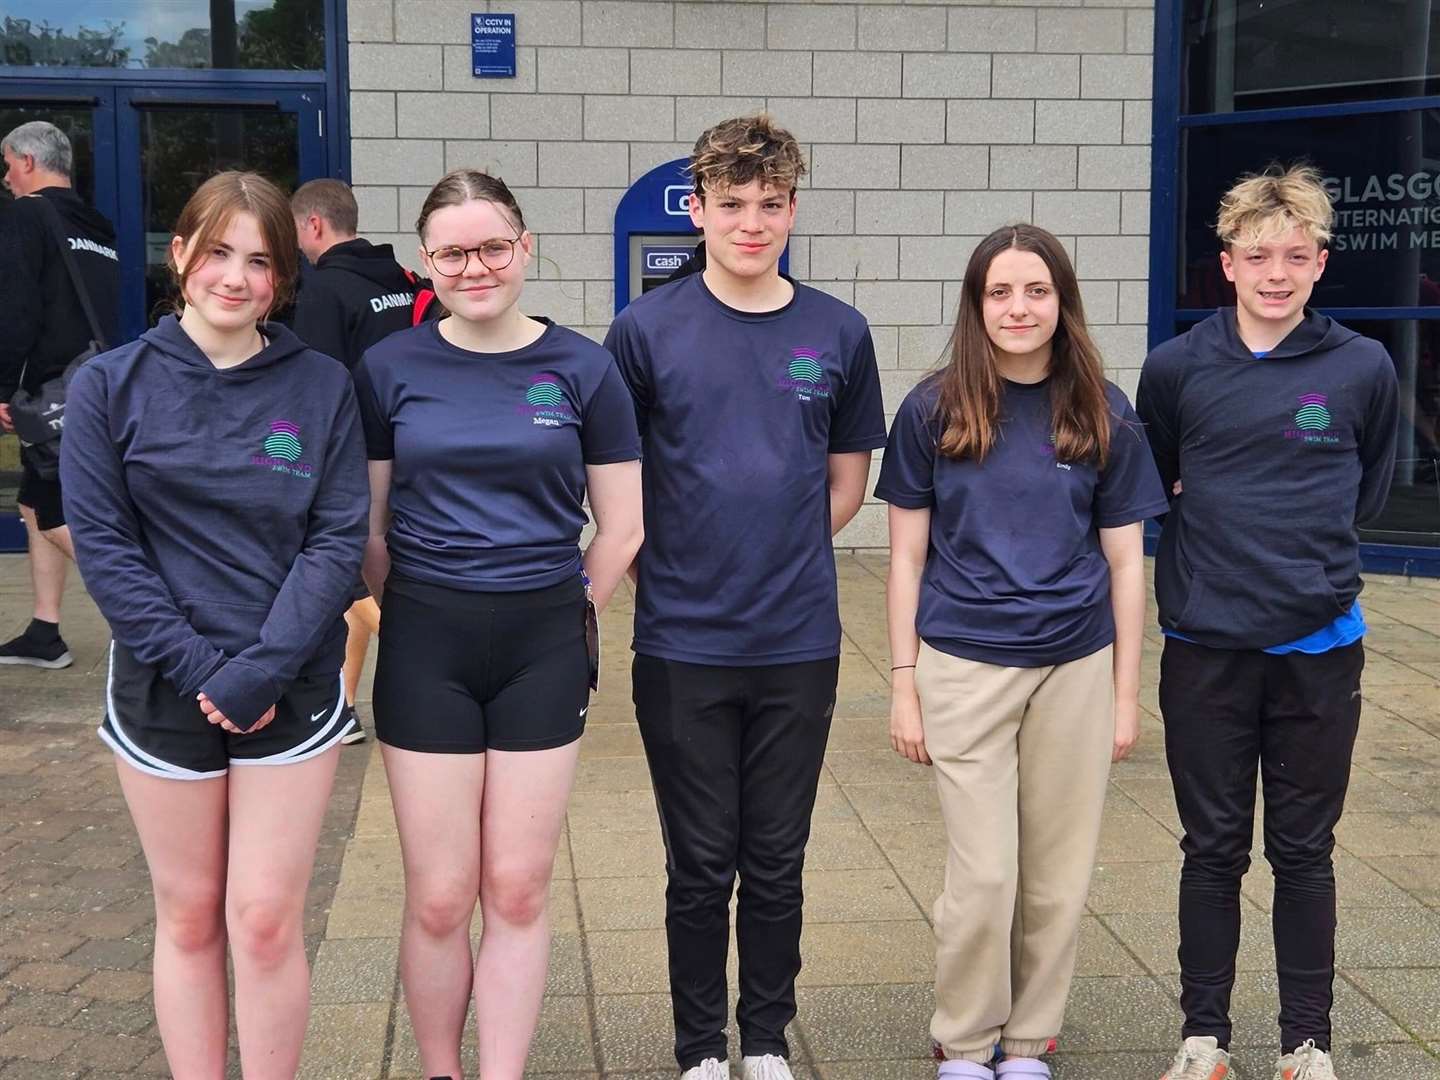 From left: Keira Bain, Megan Mackay, Tom Armitage, Emily MacDougall and Jed Armitage outside the Tollcross pool in Glasgow.